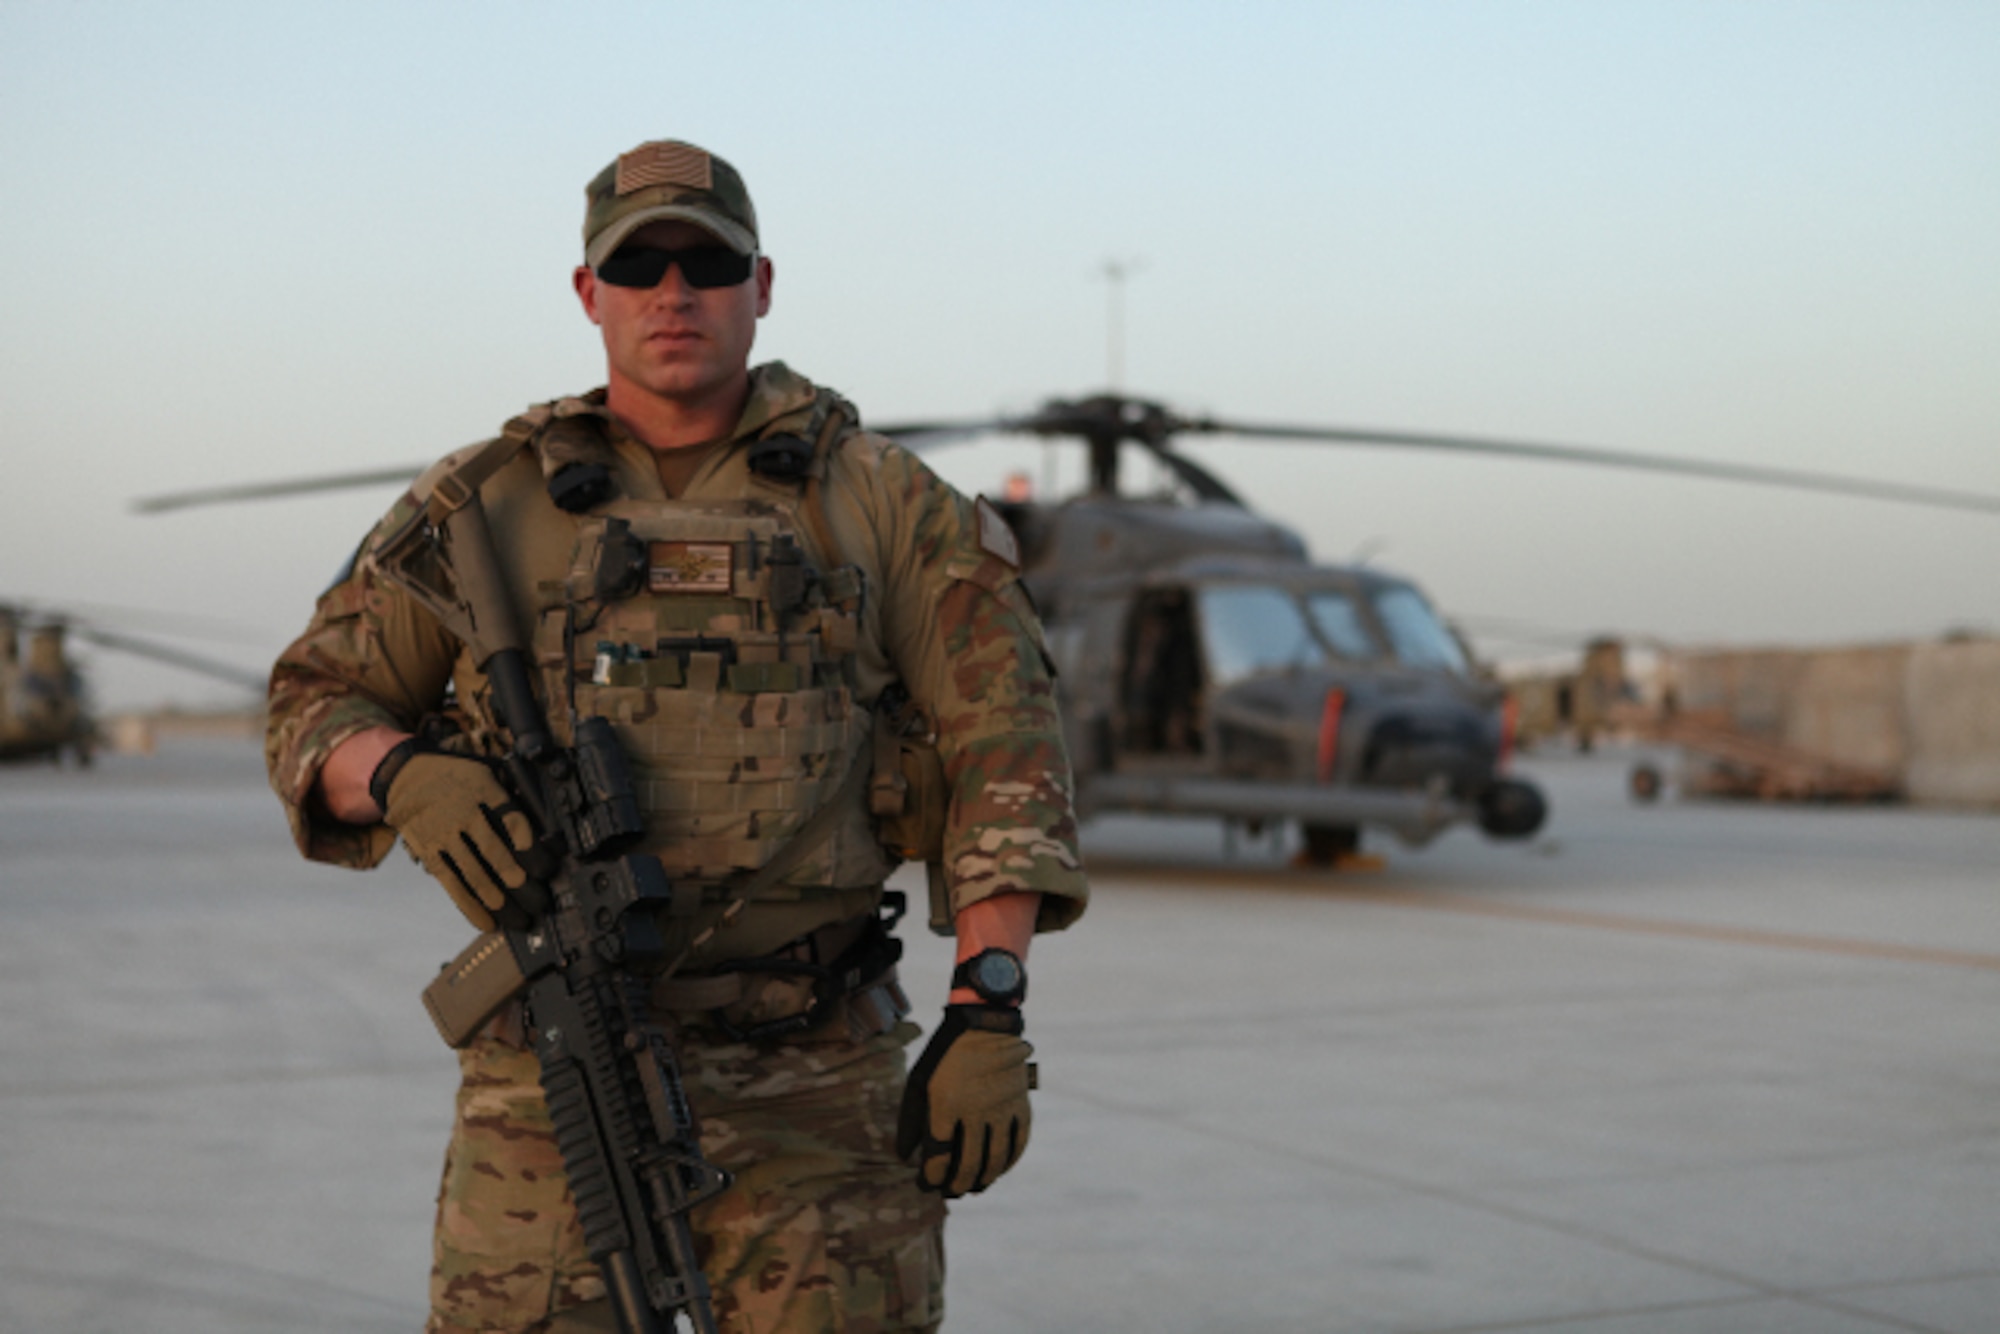 Capt. Seth Davis, 342nd Training Squadron Det. 1 commander, served as the detachment commander in the summer of 2012 while a National Geographic crew filmed “Inside Combat Rescue.” (Courtesy photo)